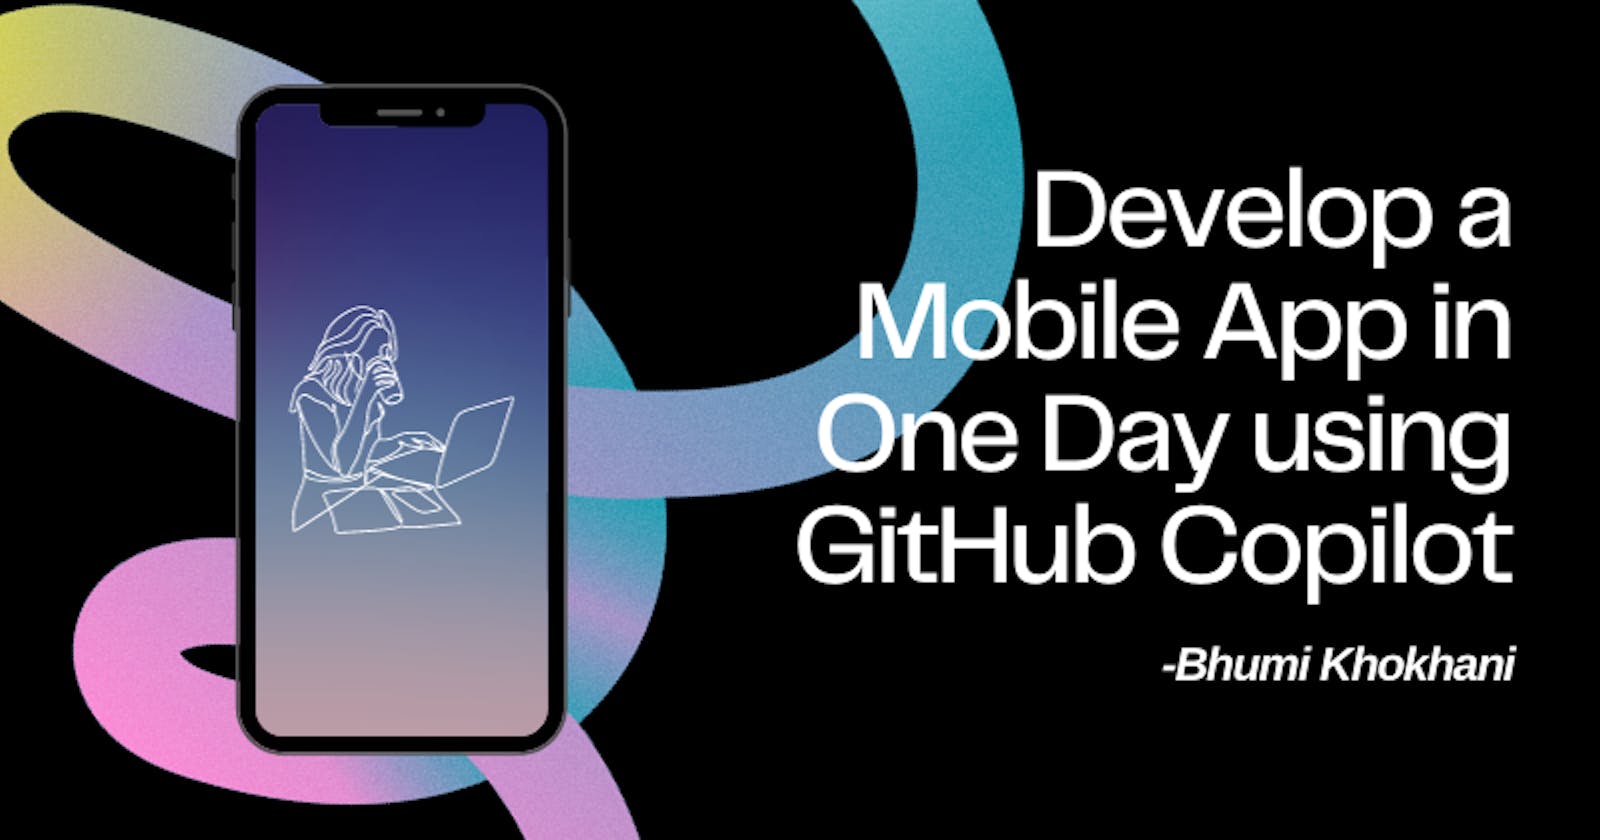 Develop a Mobile App in One Day using GitHub Copilot